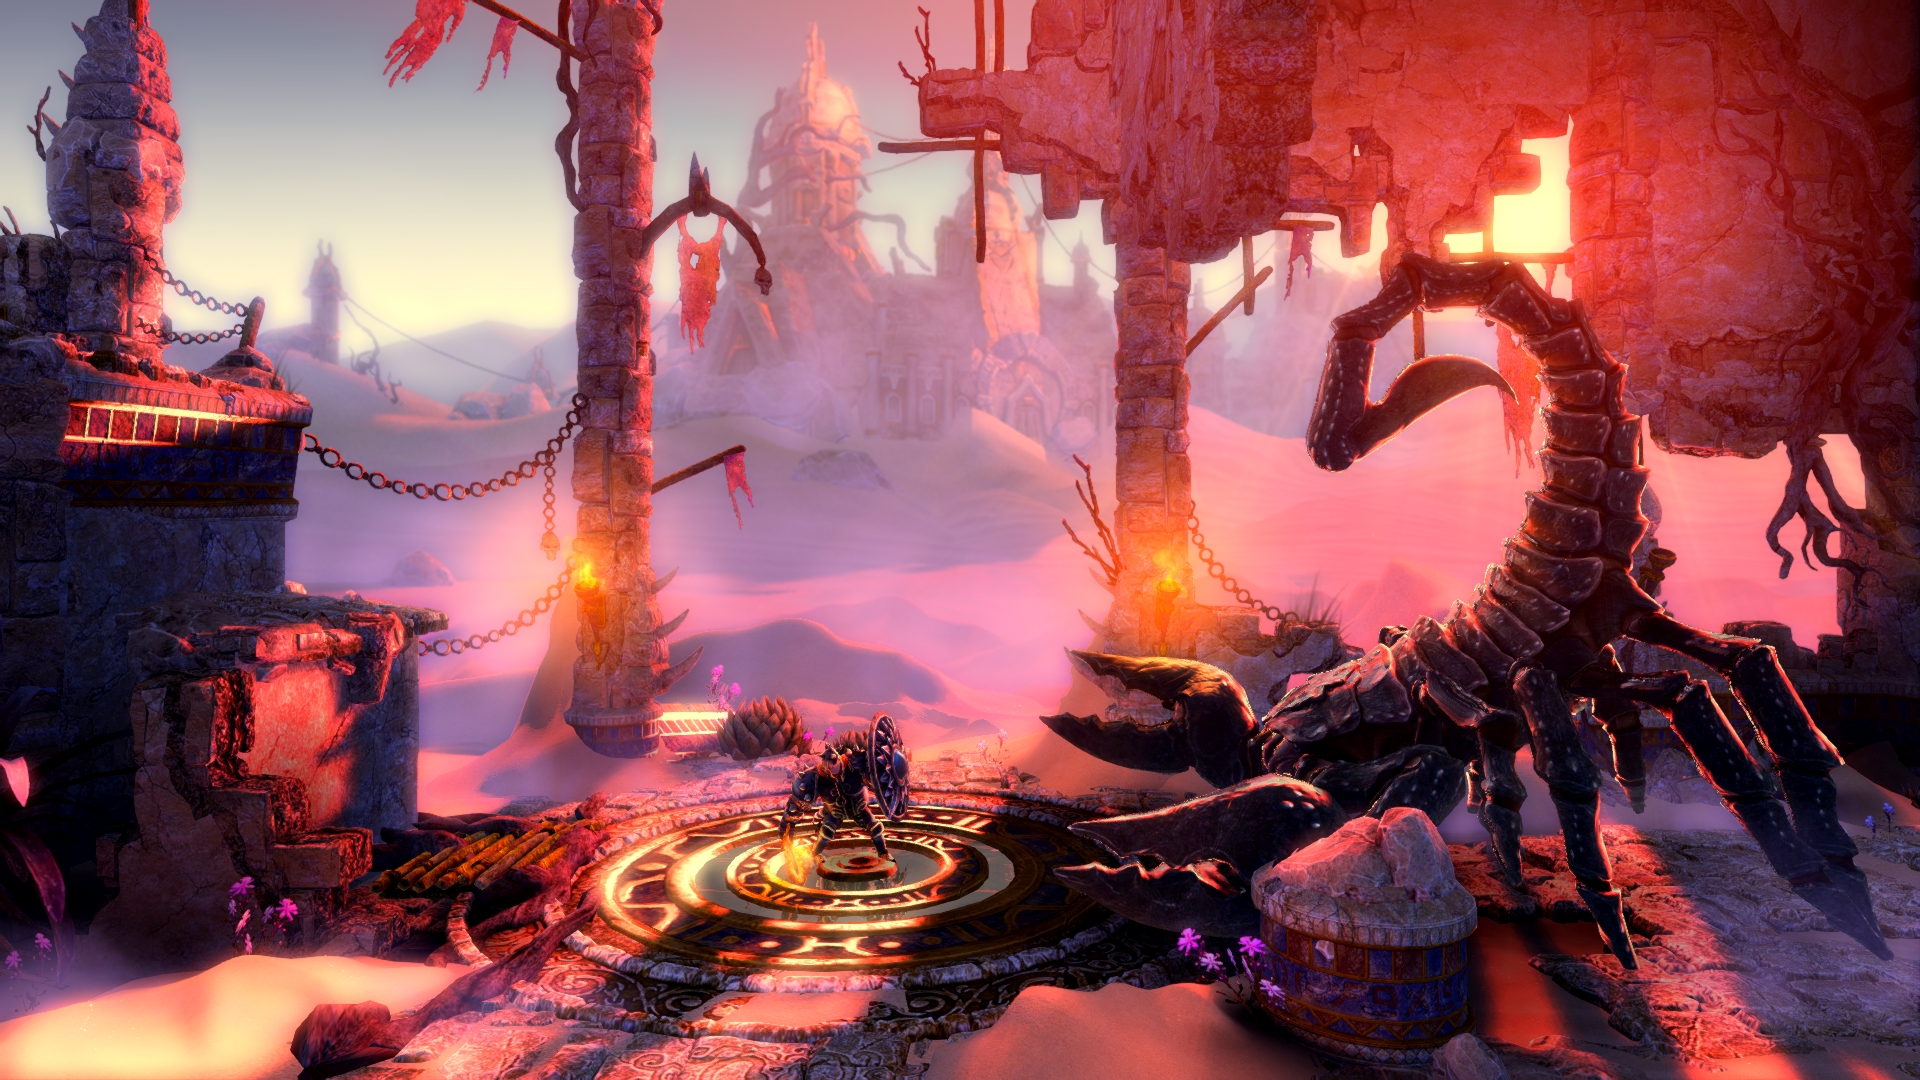 trine 2 complete story ps4 download free